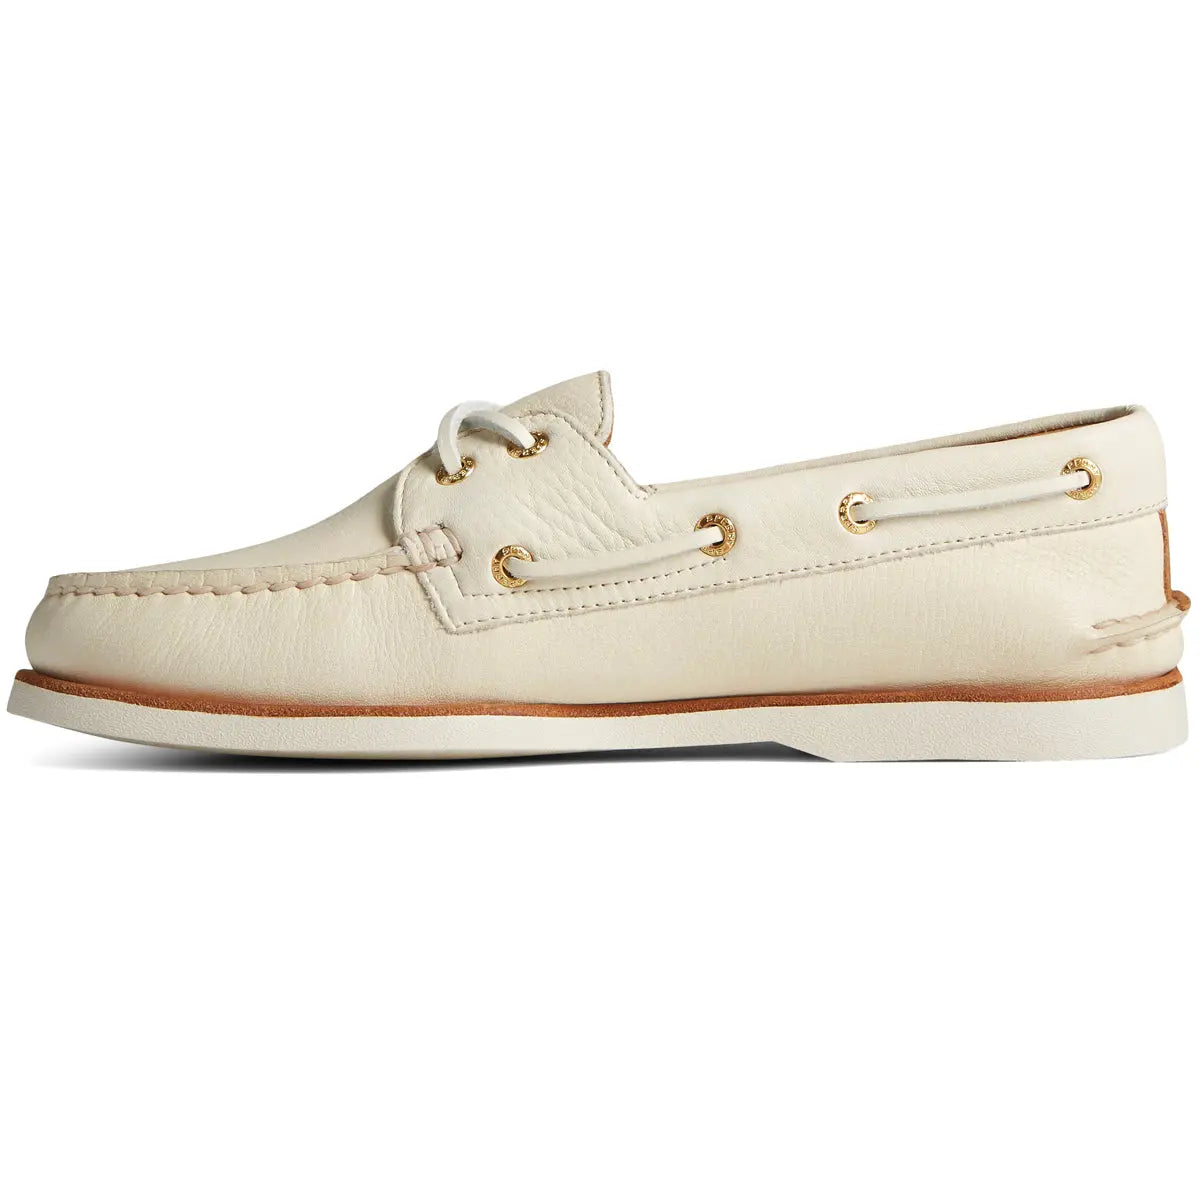 Cream Gold Cup Authentic Original 2-Eye Boat Shoe  Sperry   